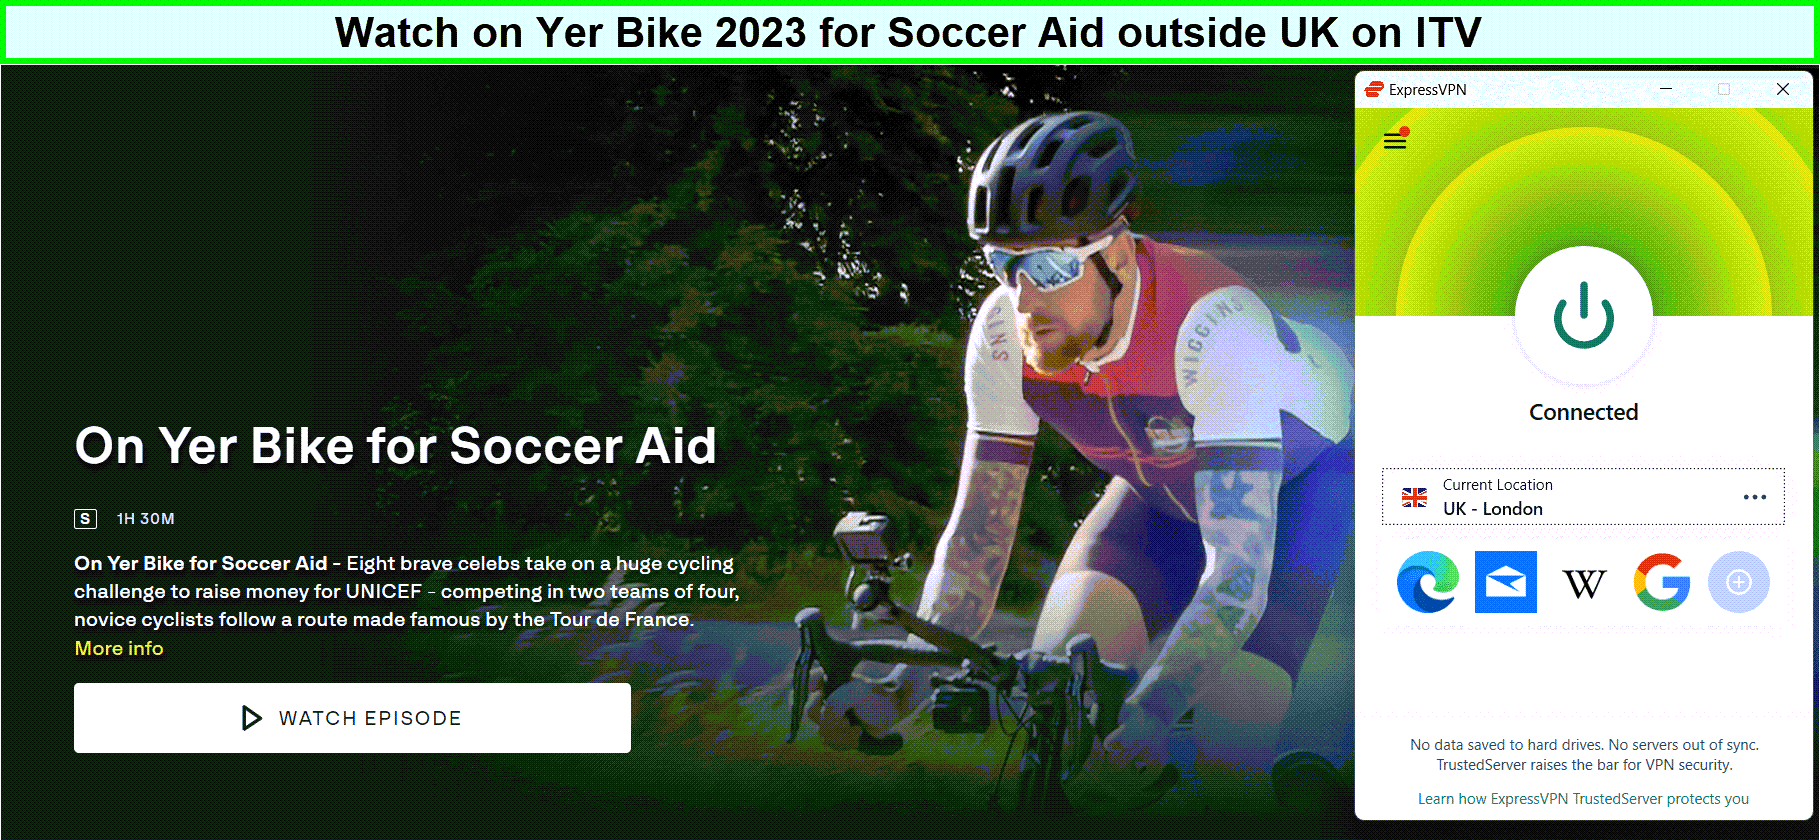 Watch-On-Yer-Bike-2023-for-Soccer-Aid-in-India-on-ITV-with-ExpressVPN